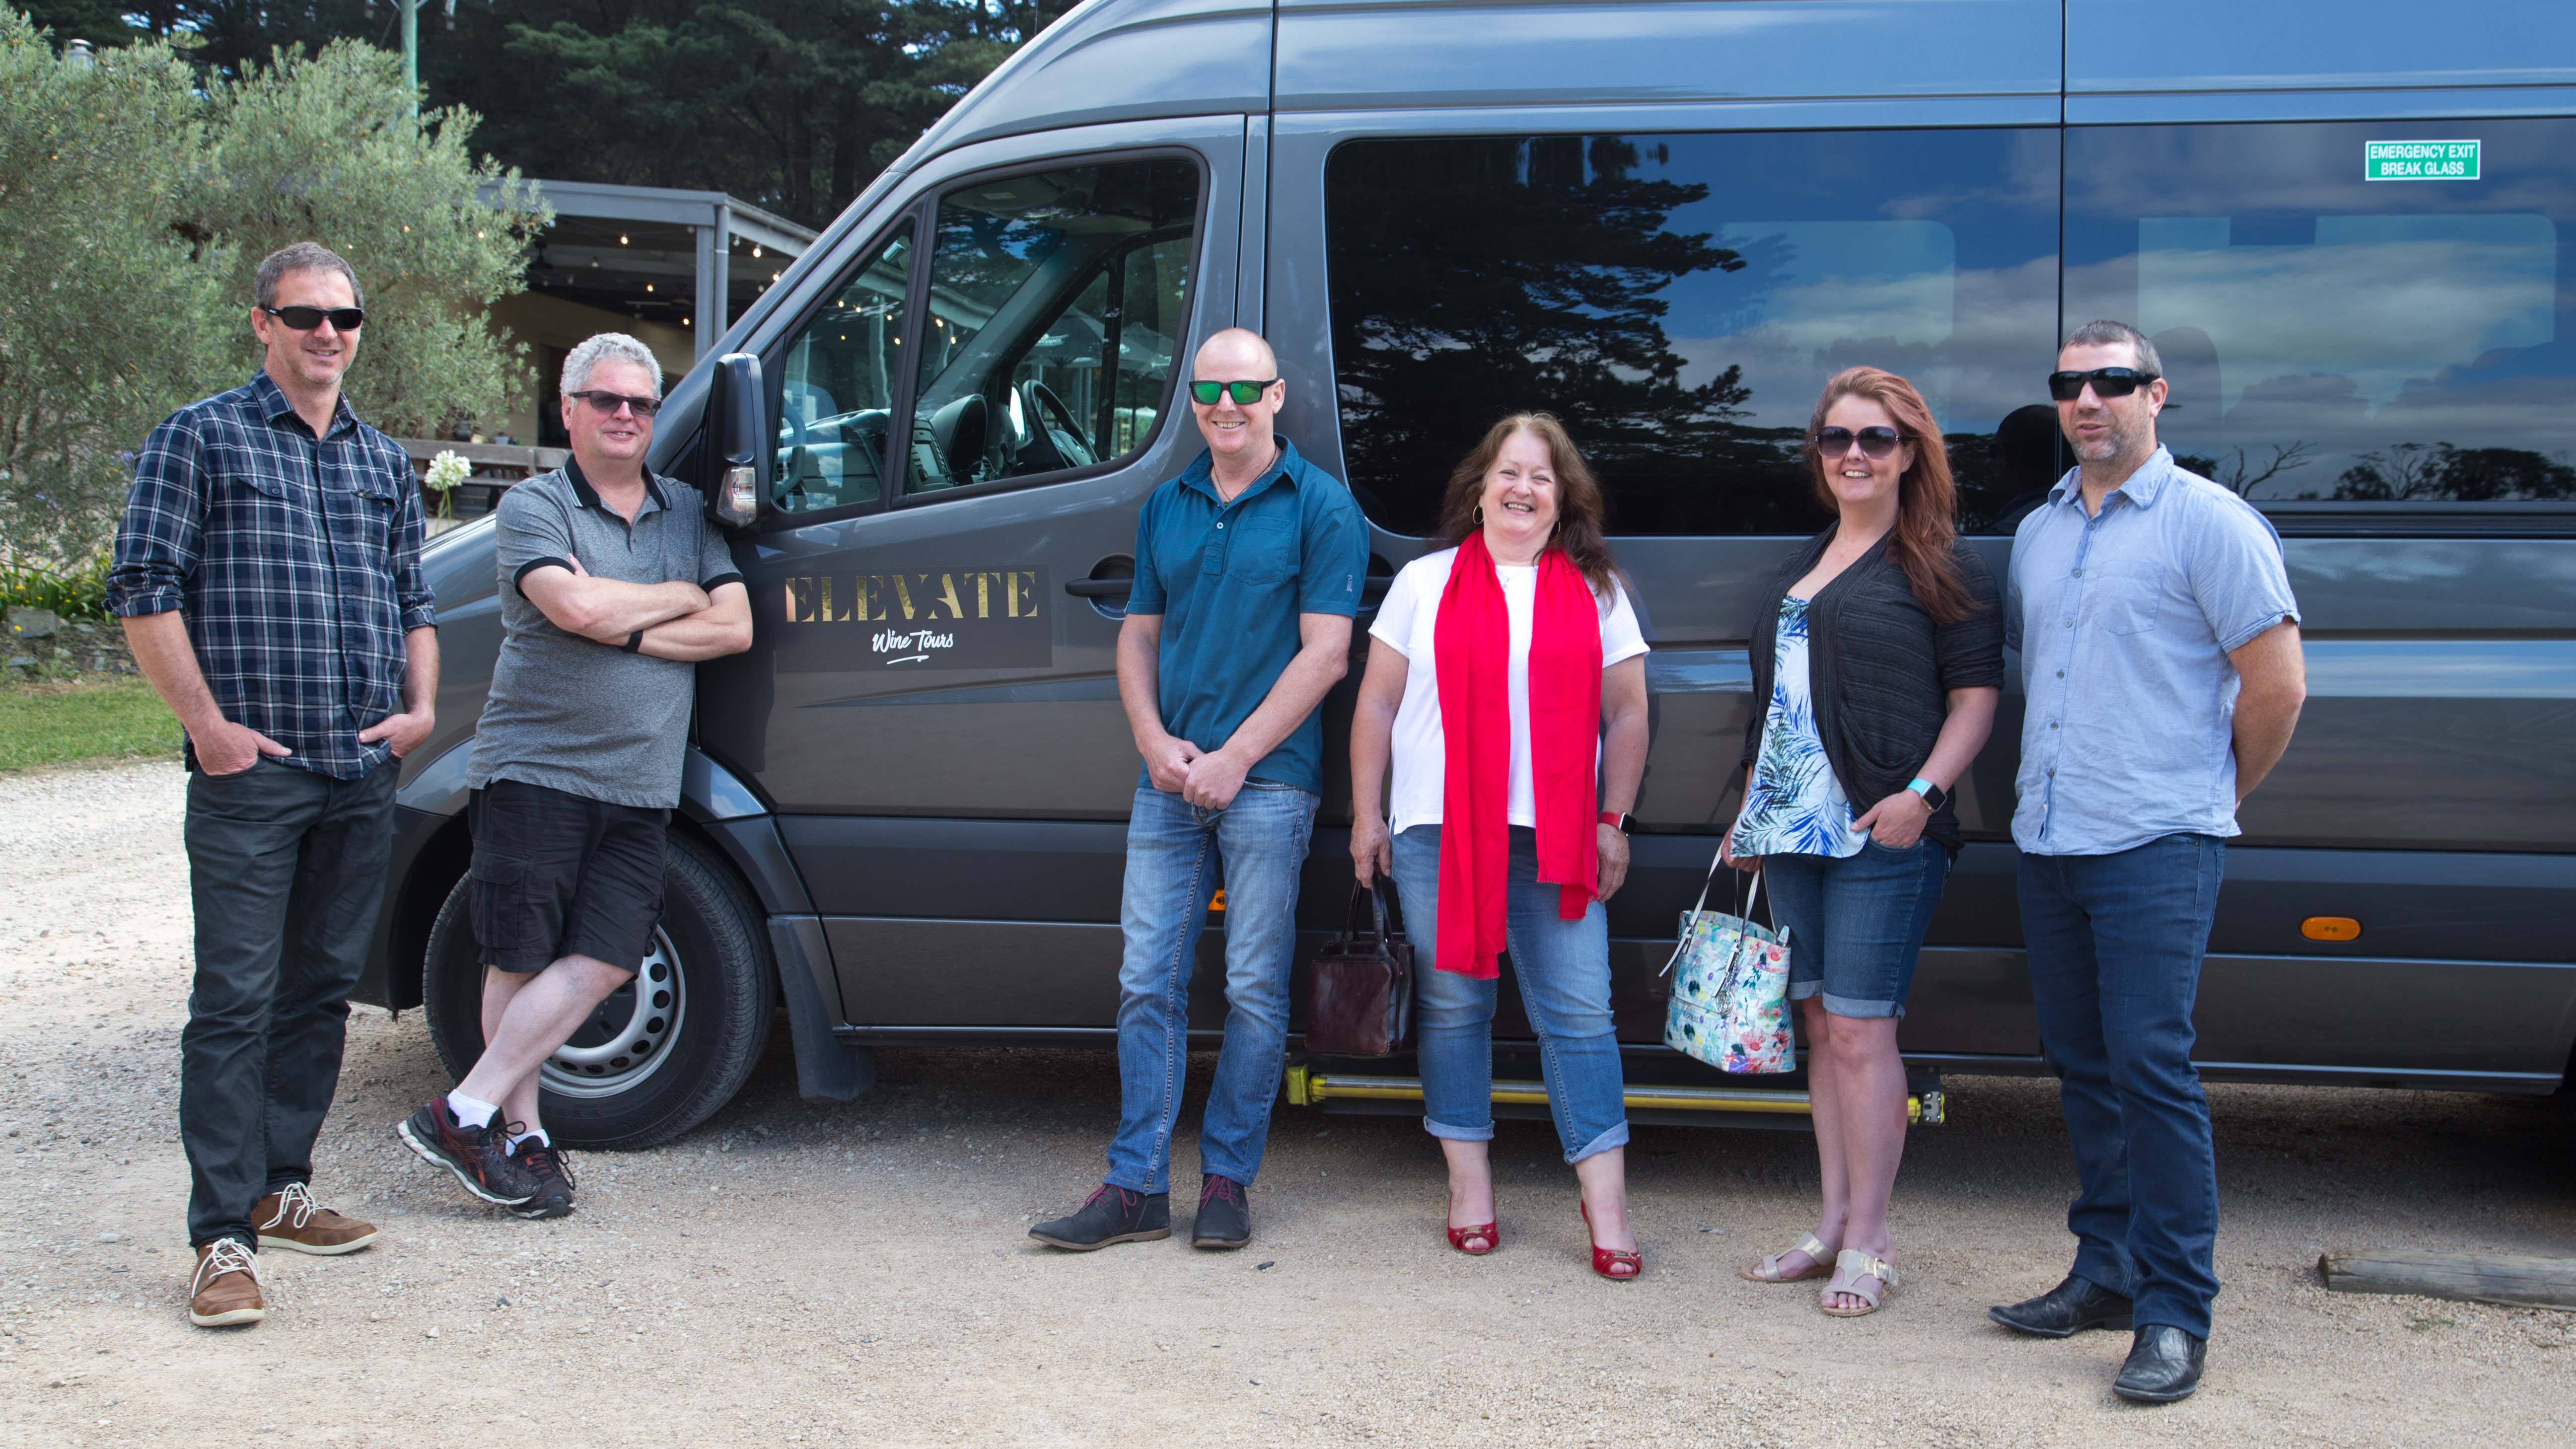 Group photo with the Elevate Wine Tour Mercedes-Benz vehicle